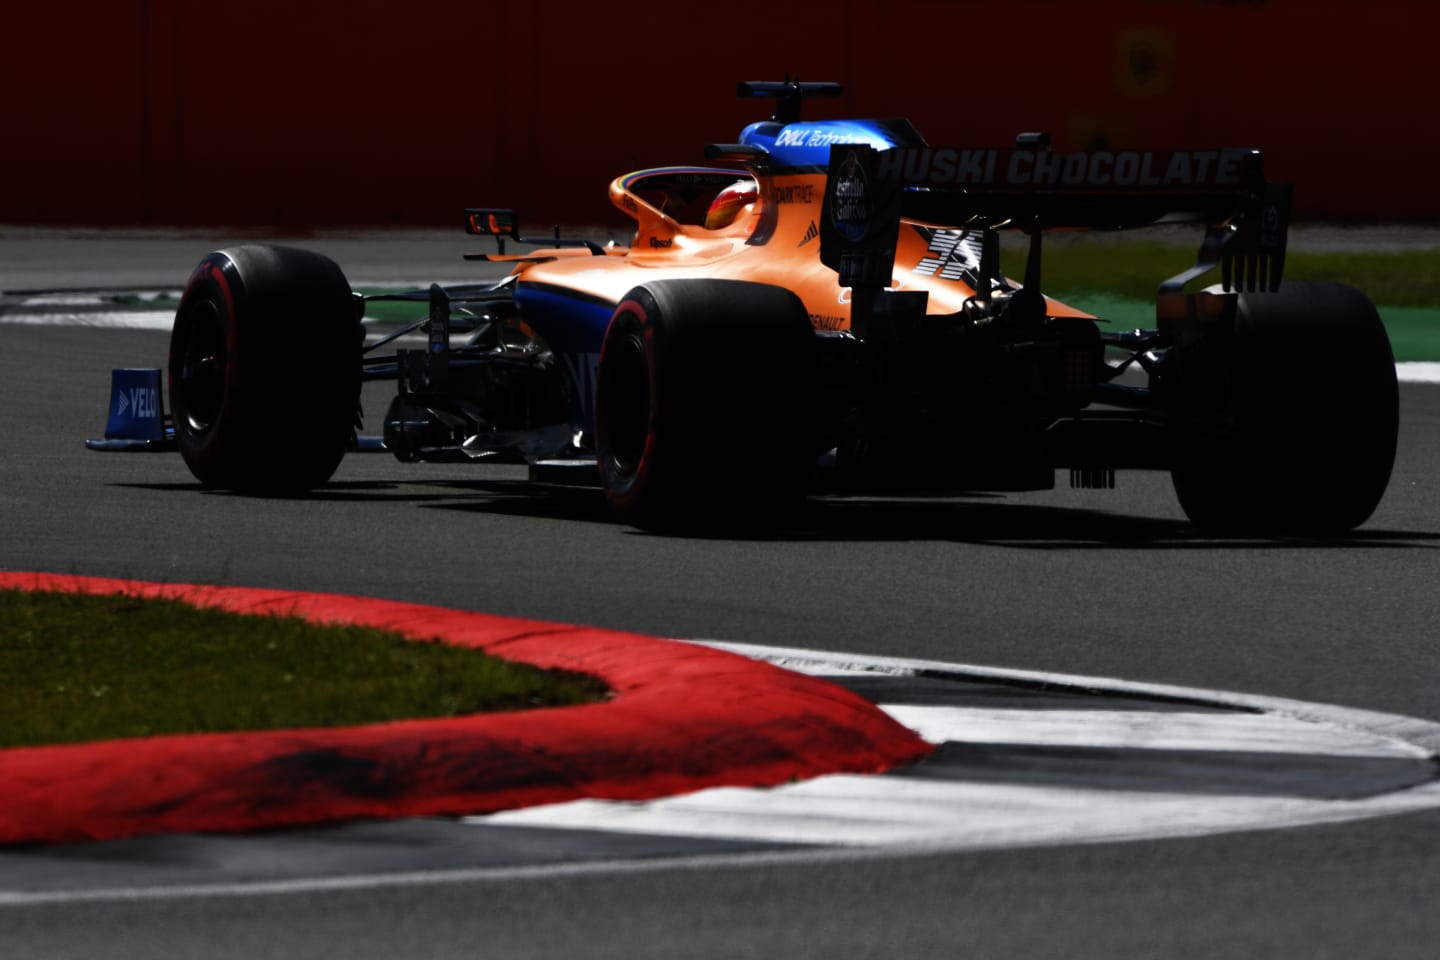 NORTHAMPTON, ENGLAND - AUGUST 01: Carlos Sainz of Spain driving the (55) McLaren F1 Team MCL35 Renault on track during qualifying for the F1 Grand Prix of Great Britain at Silverstone on August 01, 2020 in Northampton, England. (Photo by Rudy Carezzevoli/Getty Images)